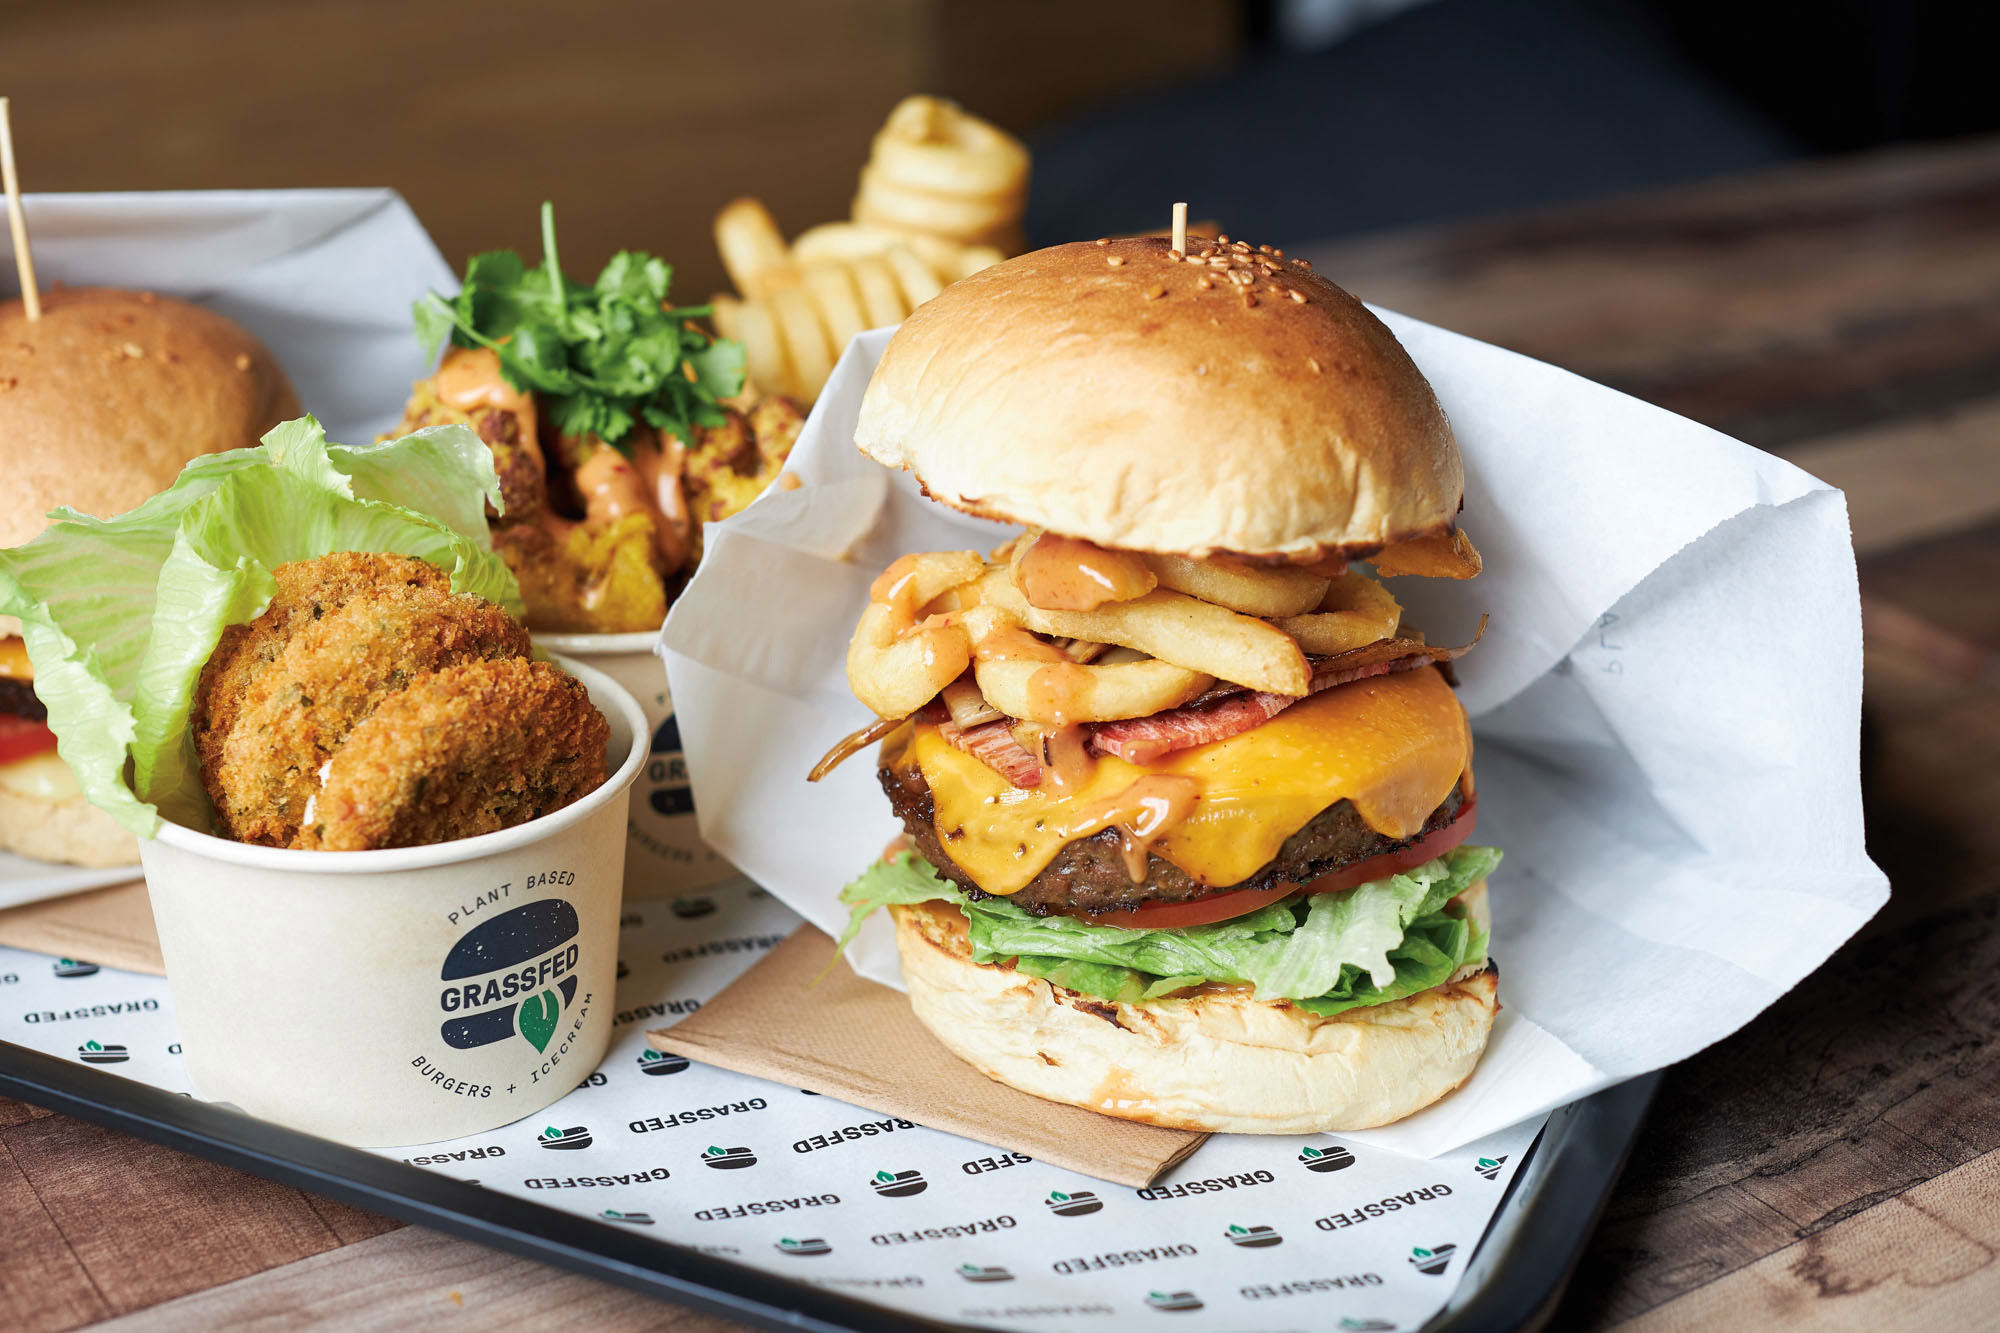 Grassfed vegan restaurant brand with juicy burger and onion rings